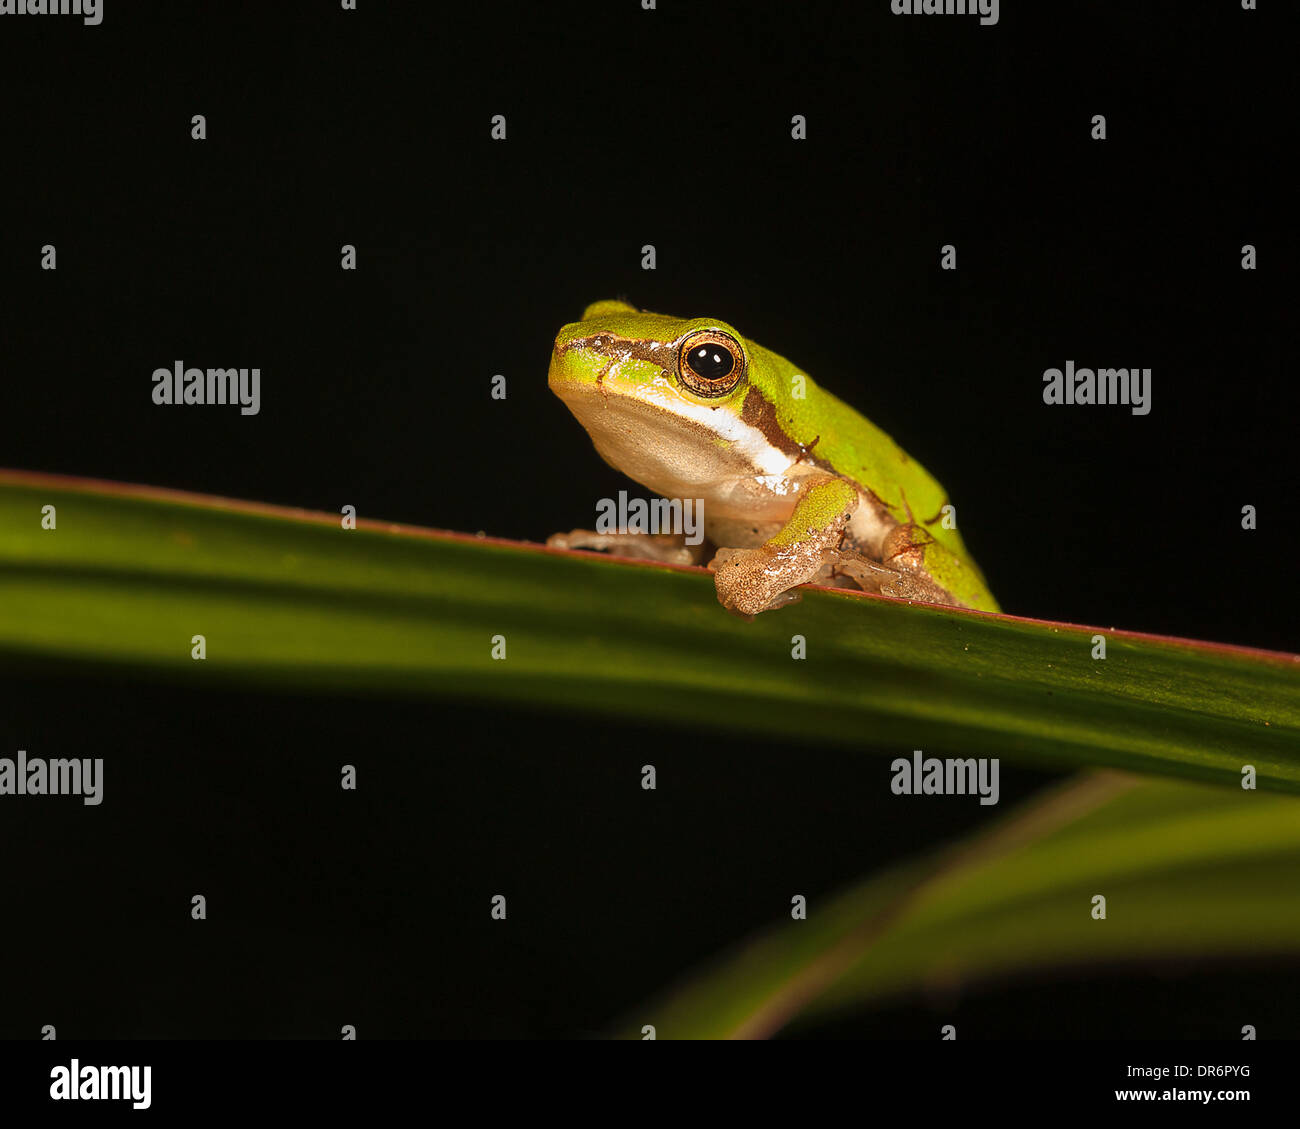 pygmy tree frog on a leaf, with a black background Stock Photo